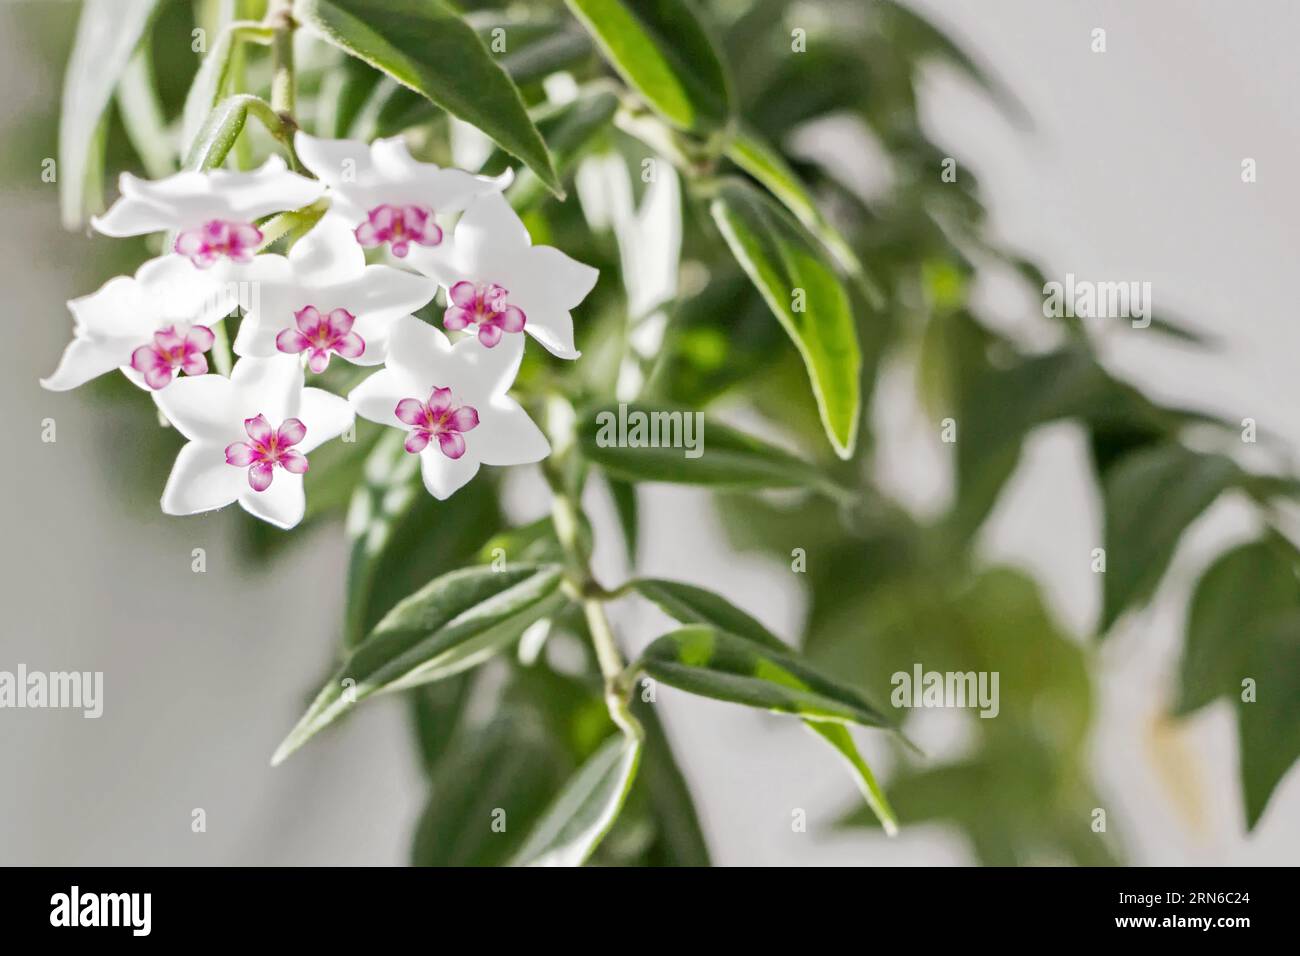 close up of blooming white Hoya bella flower with green leaves Stock Photo